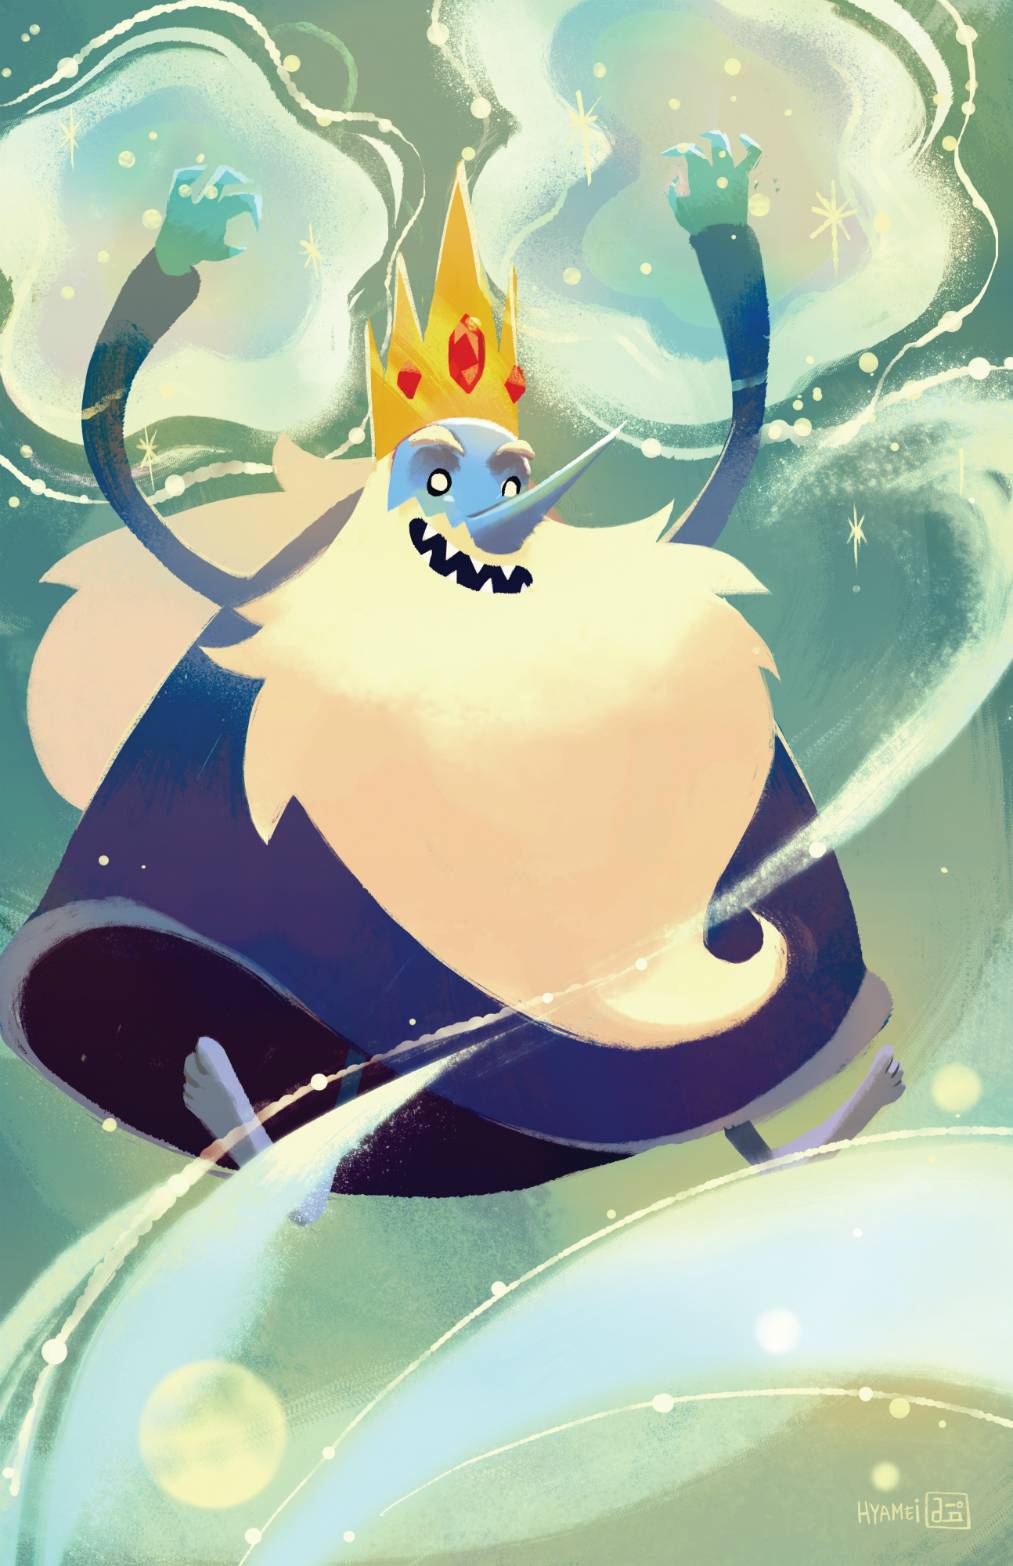 Nixel — hi this my anime version of ice king from